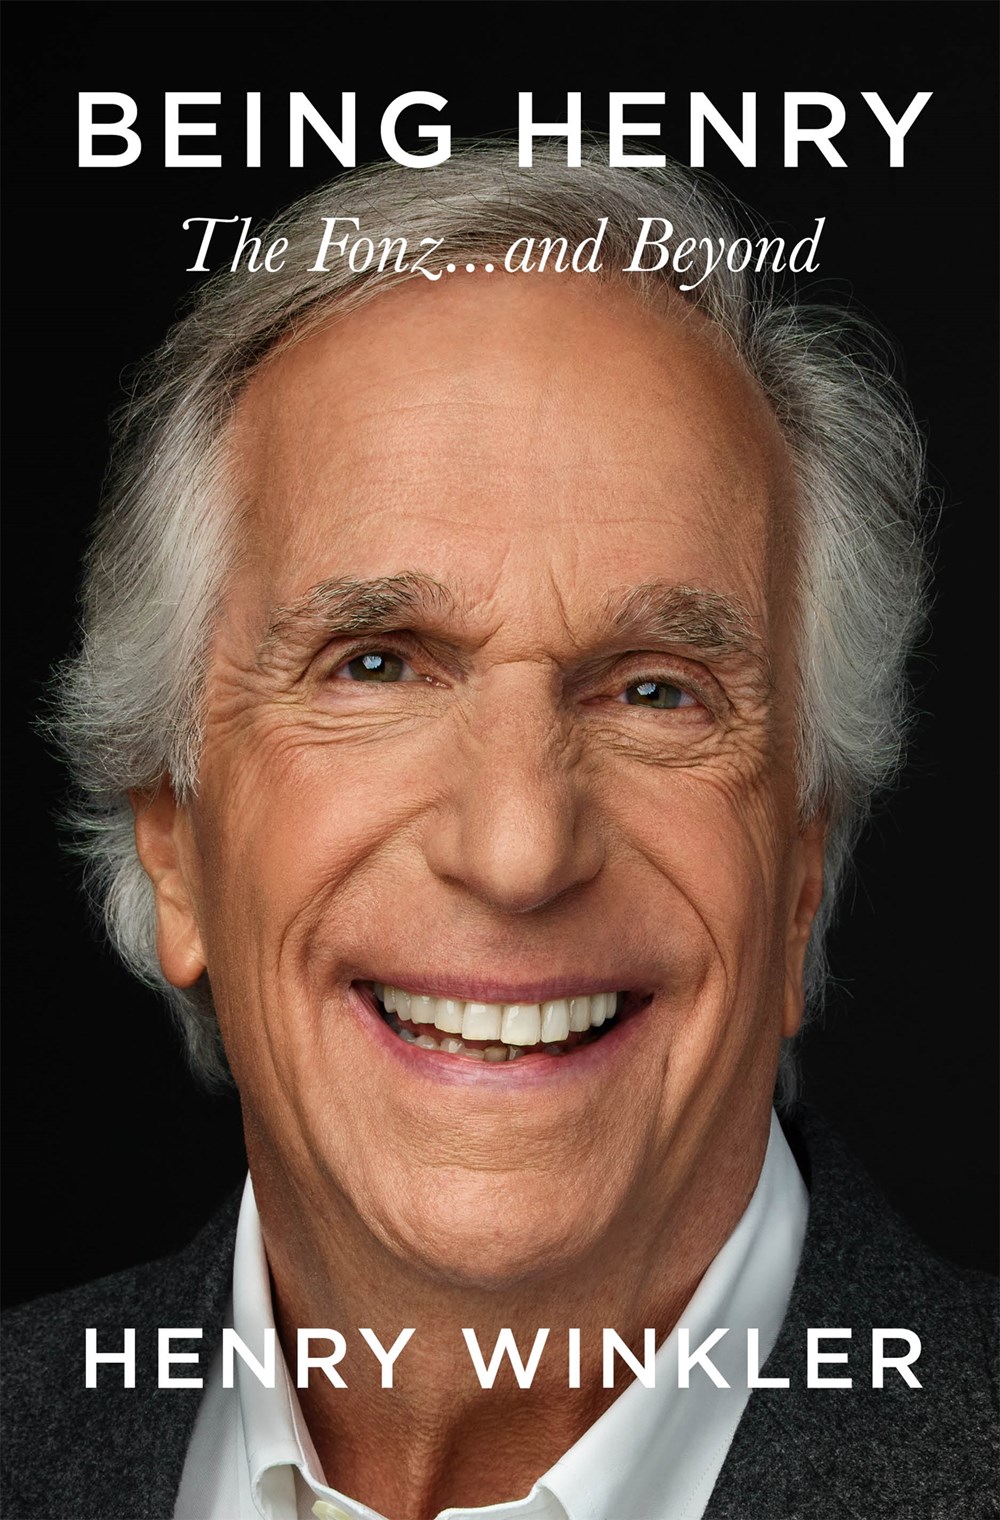 Being Henry: The Fonz…and Beyond